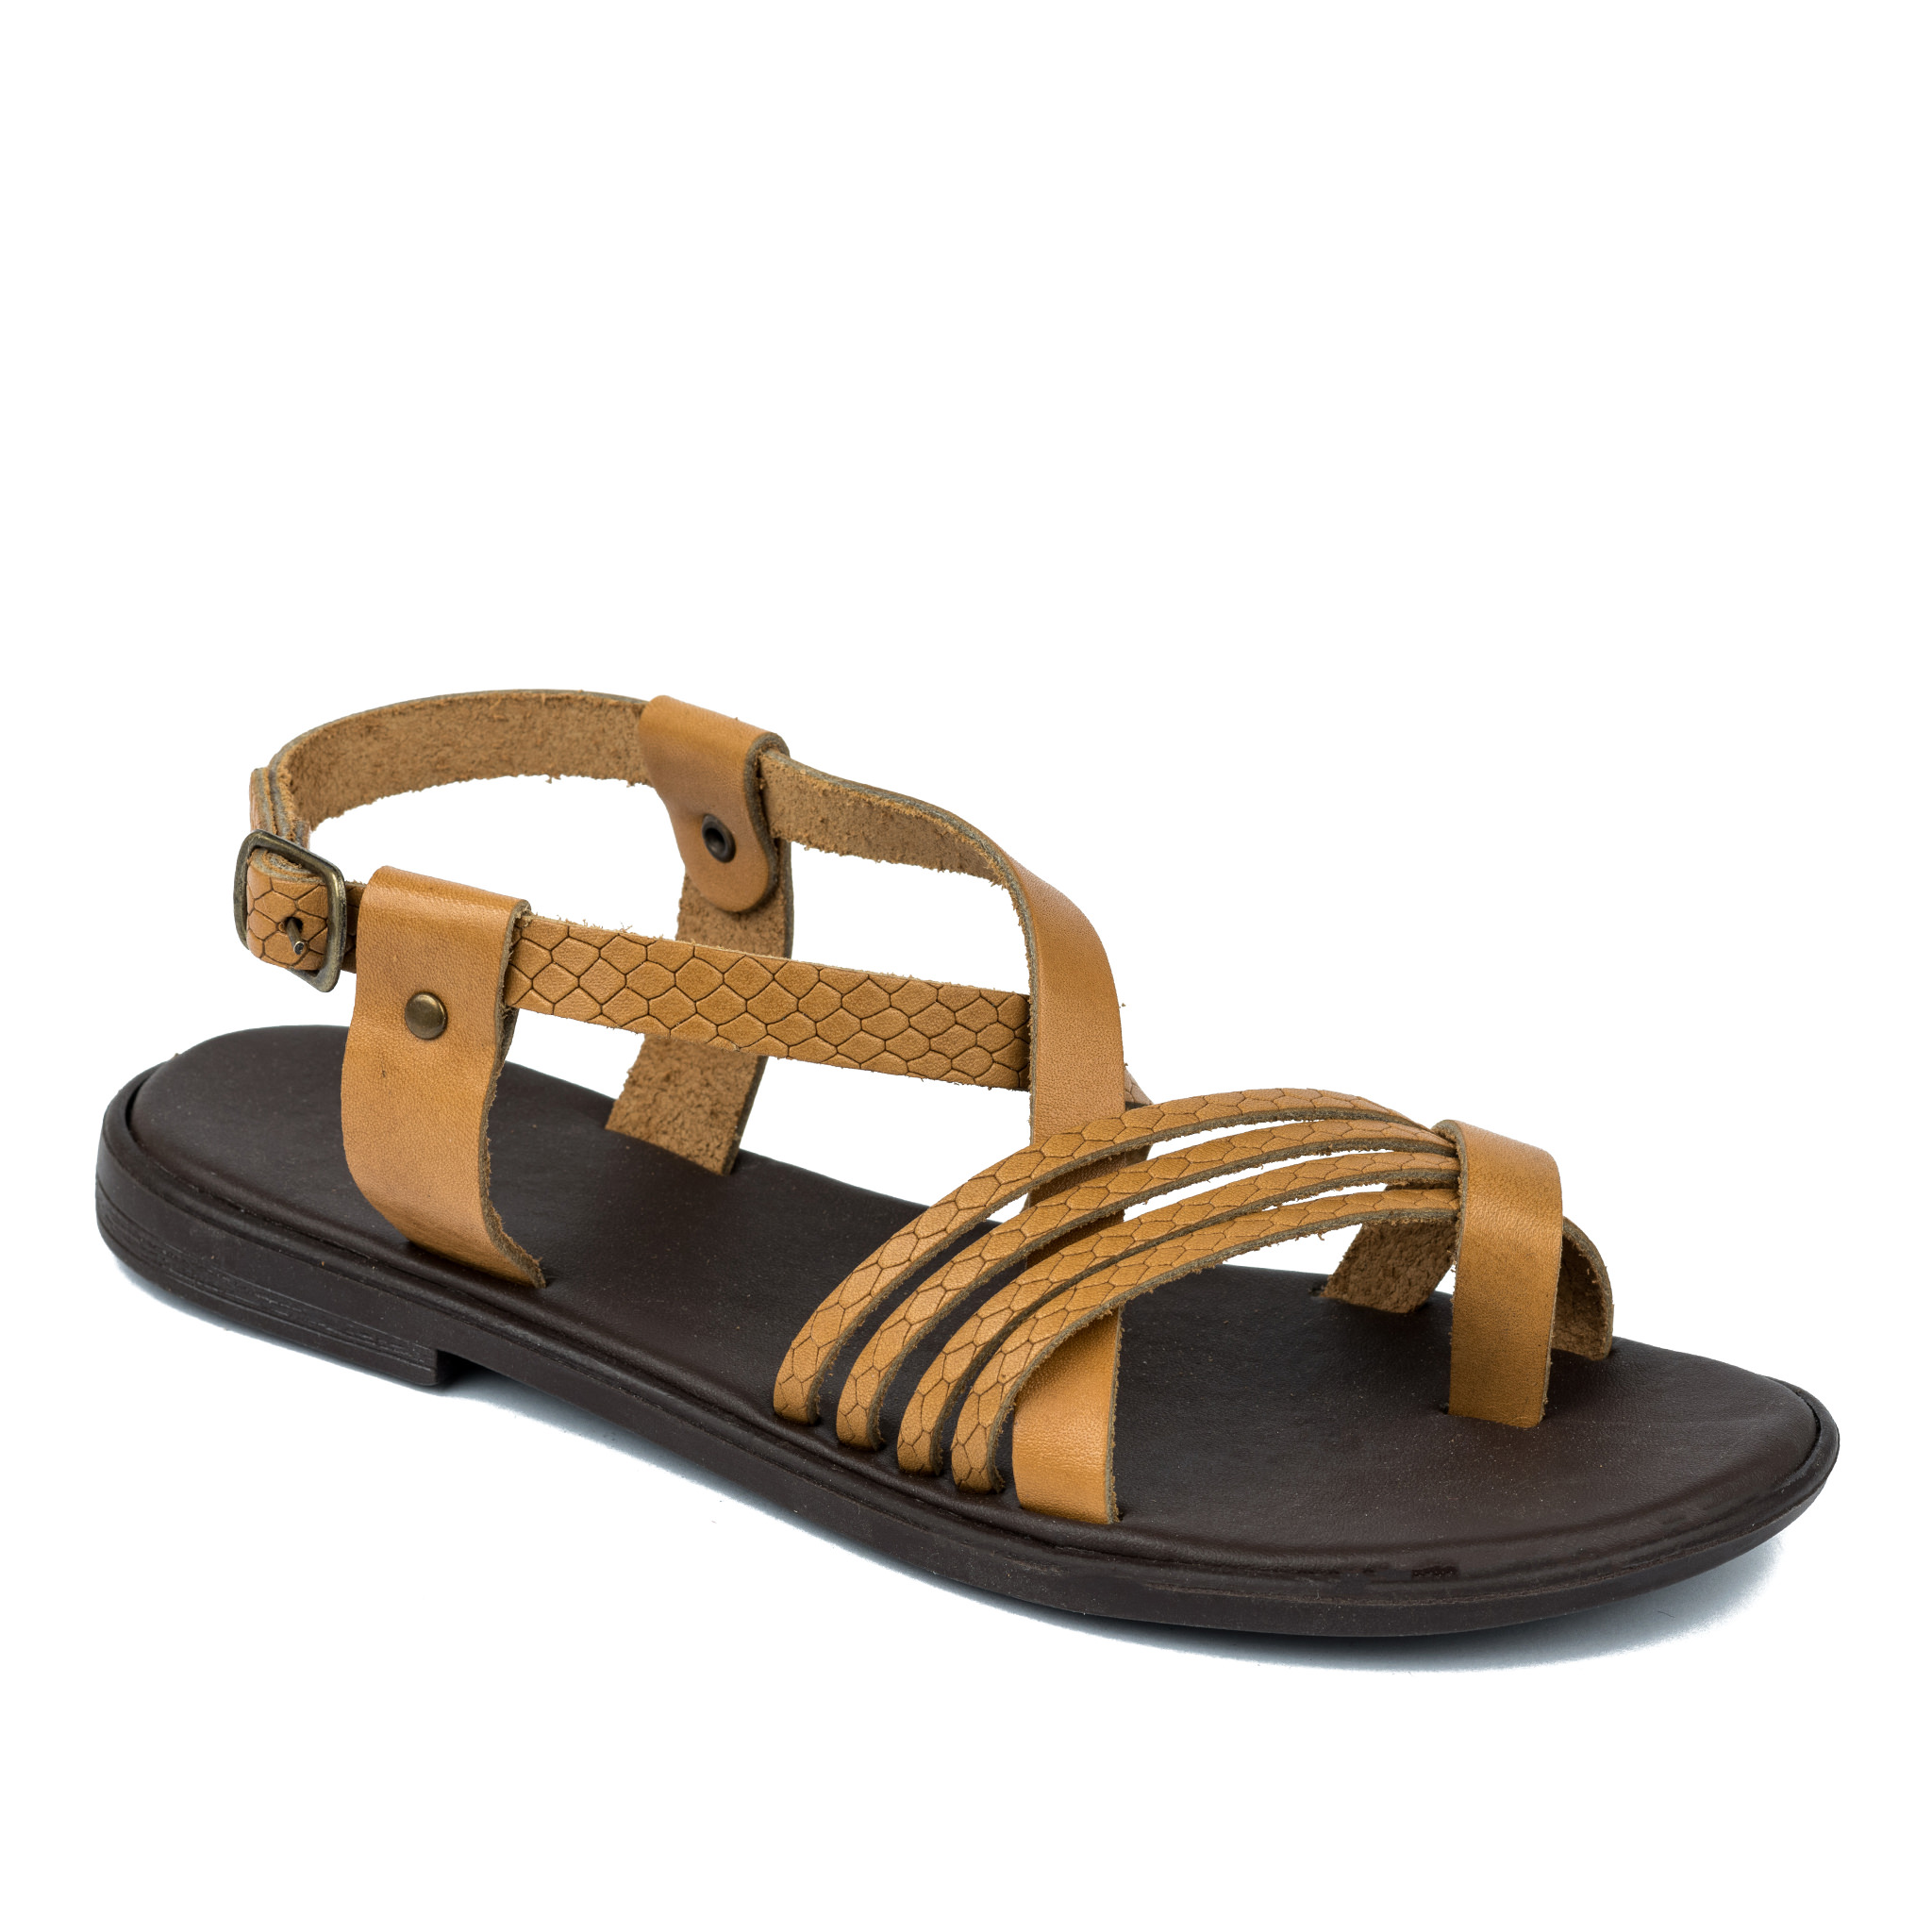 Leather sandals A271 - CAMEL